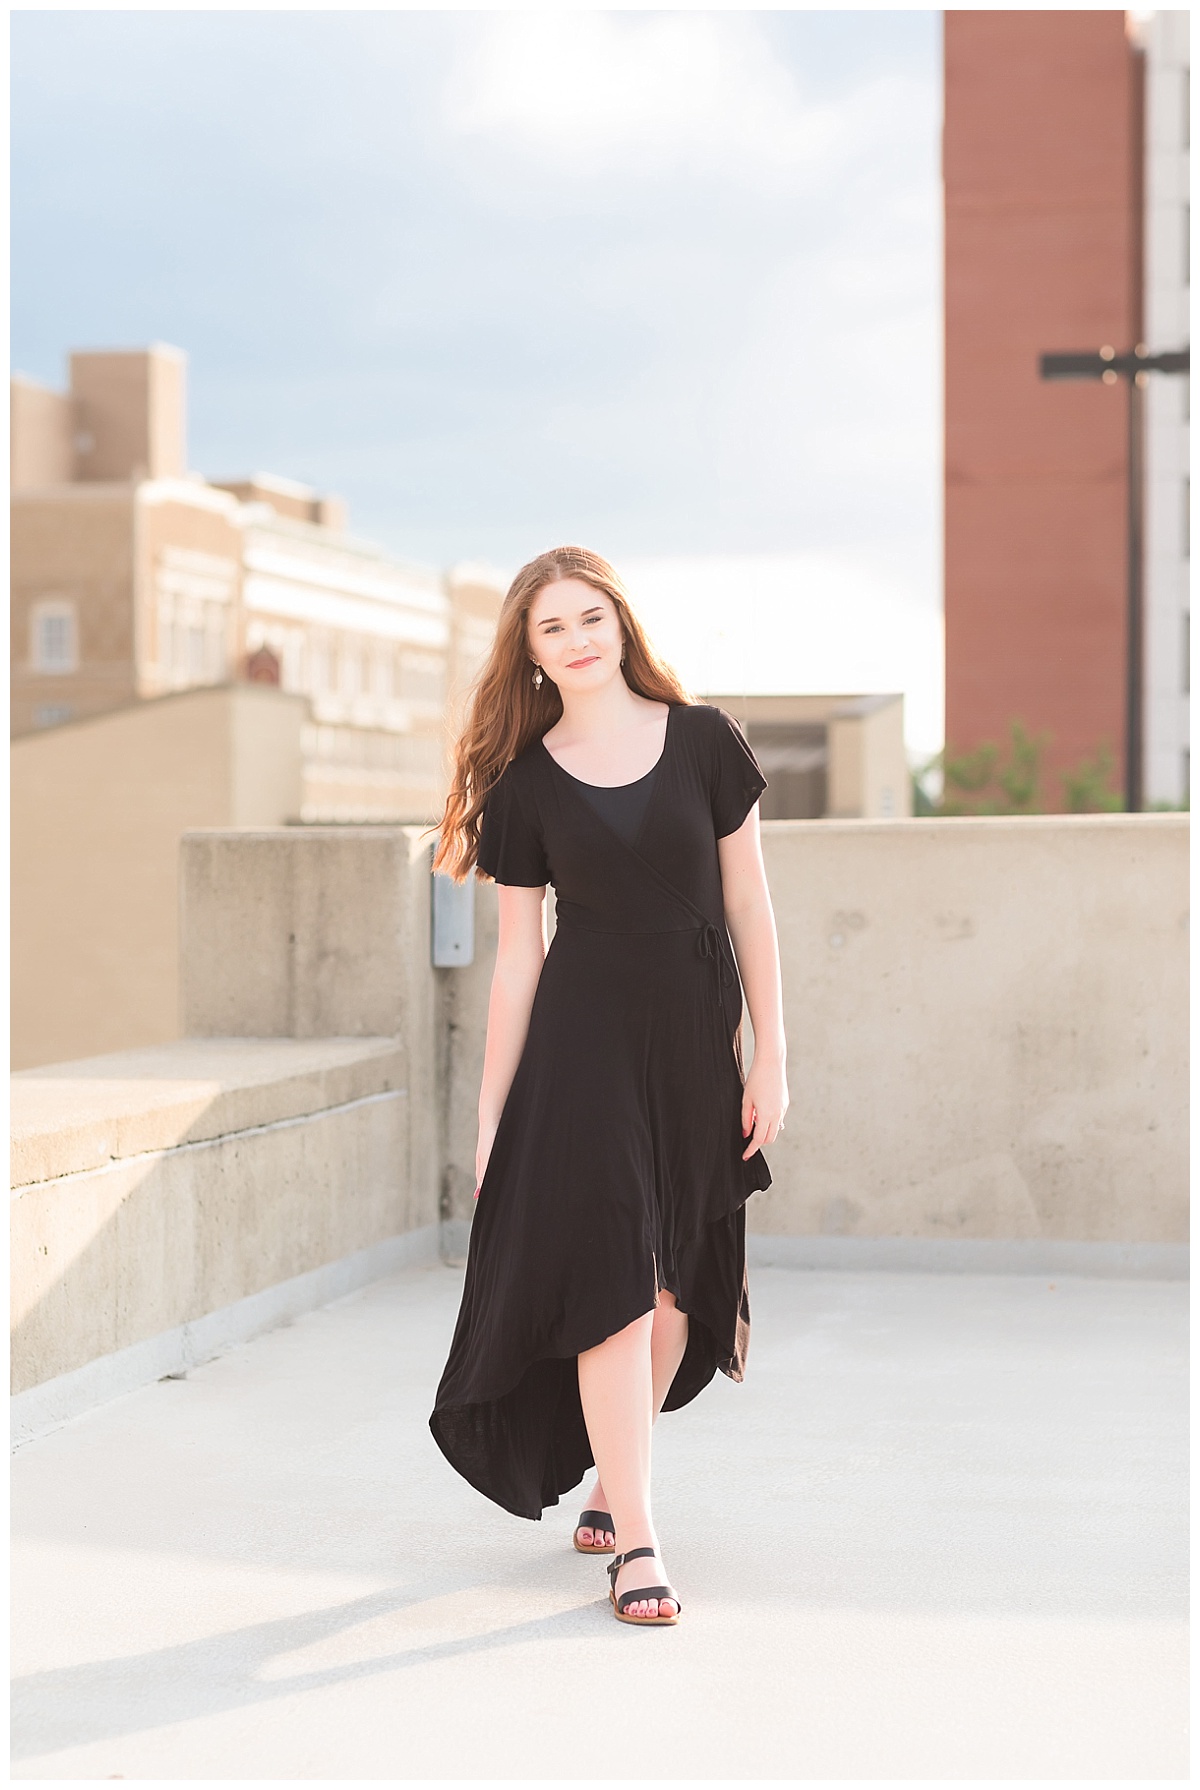 Downtown Fort Wayne Senior session photos by Simply Seeking Photography